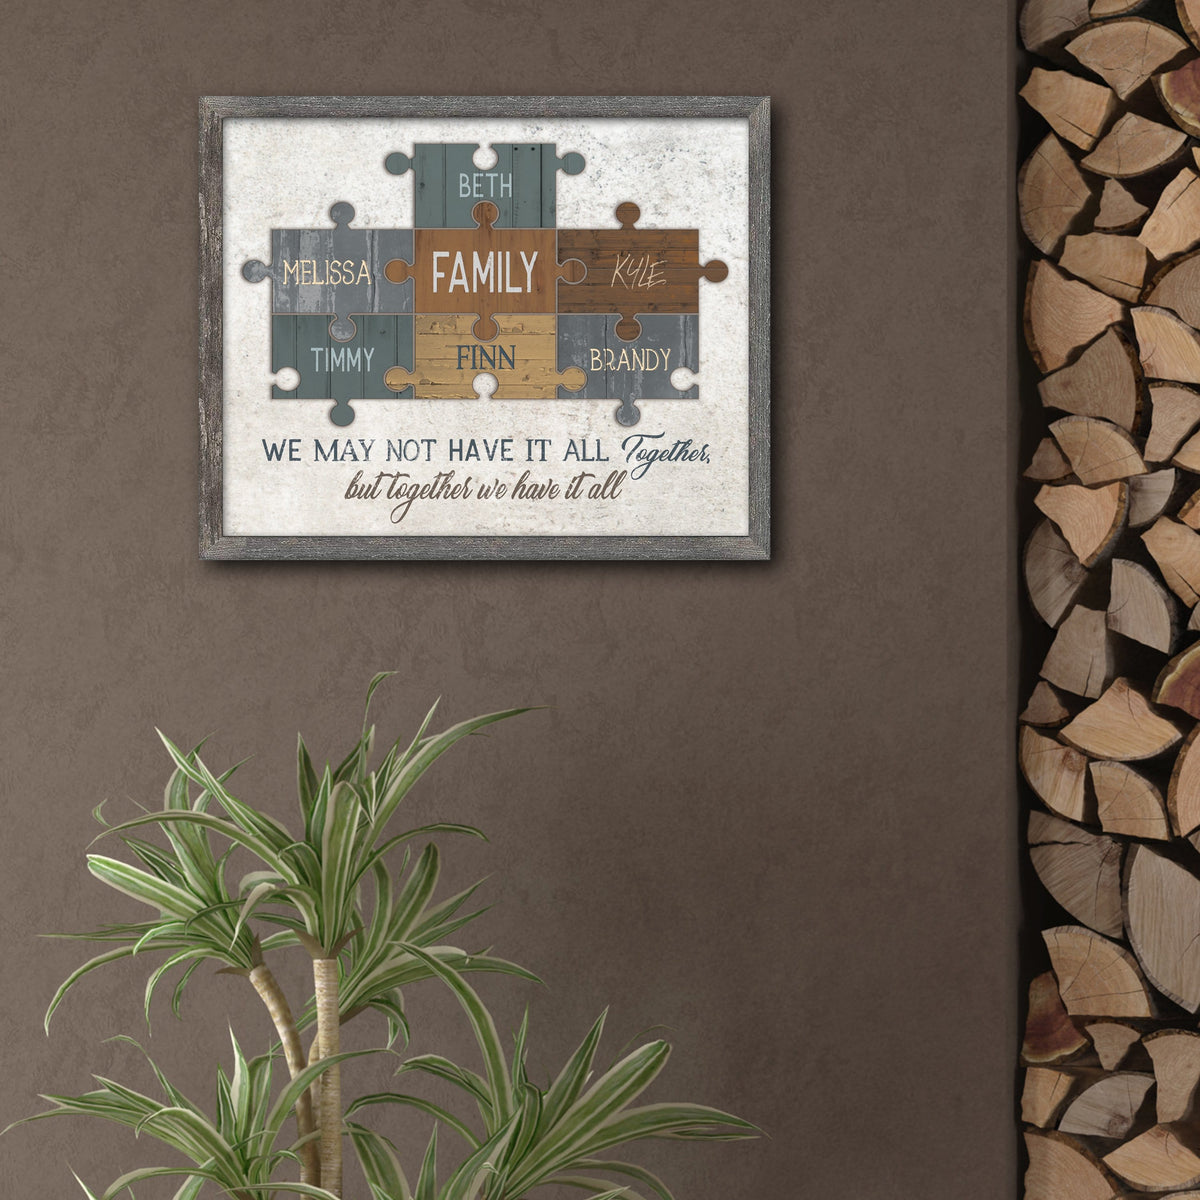 A great personalized family gift that make a beautiful wall display